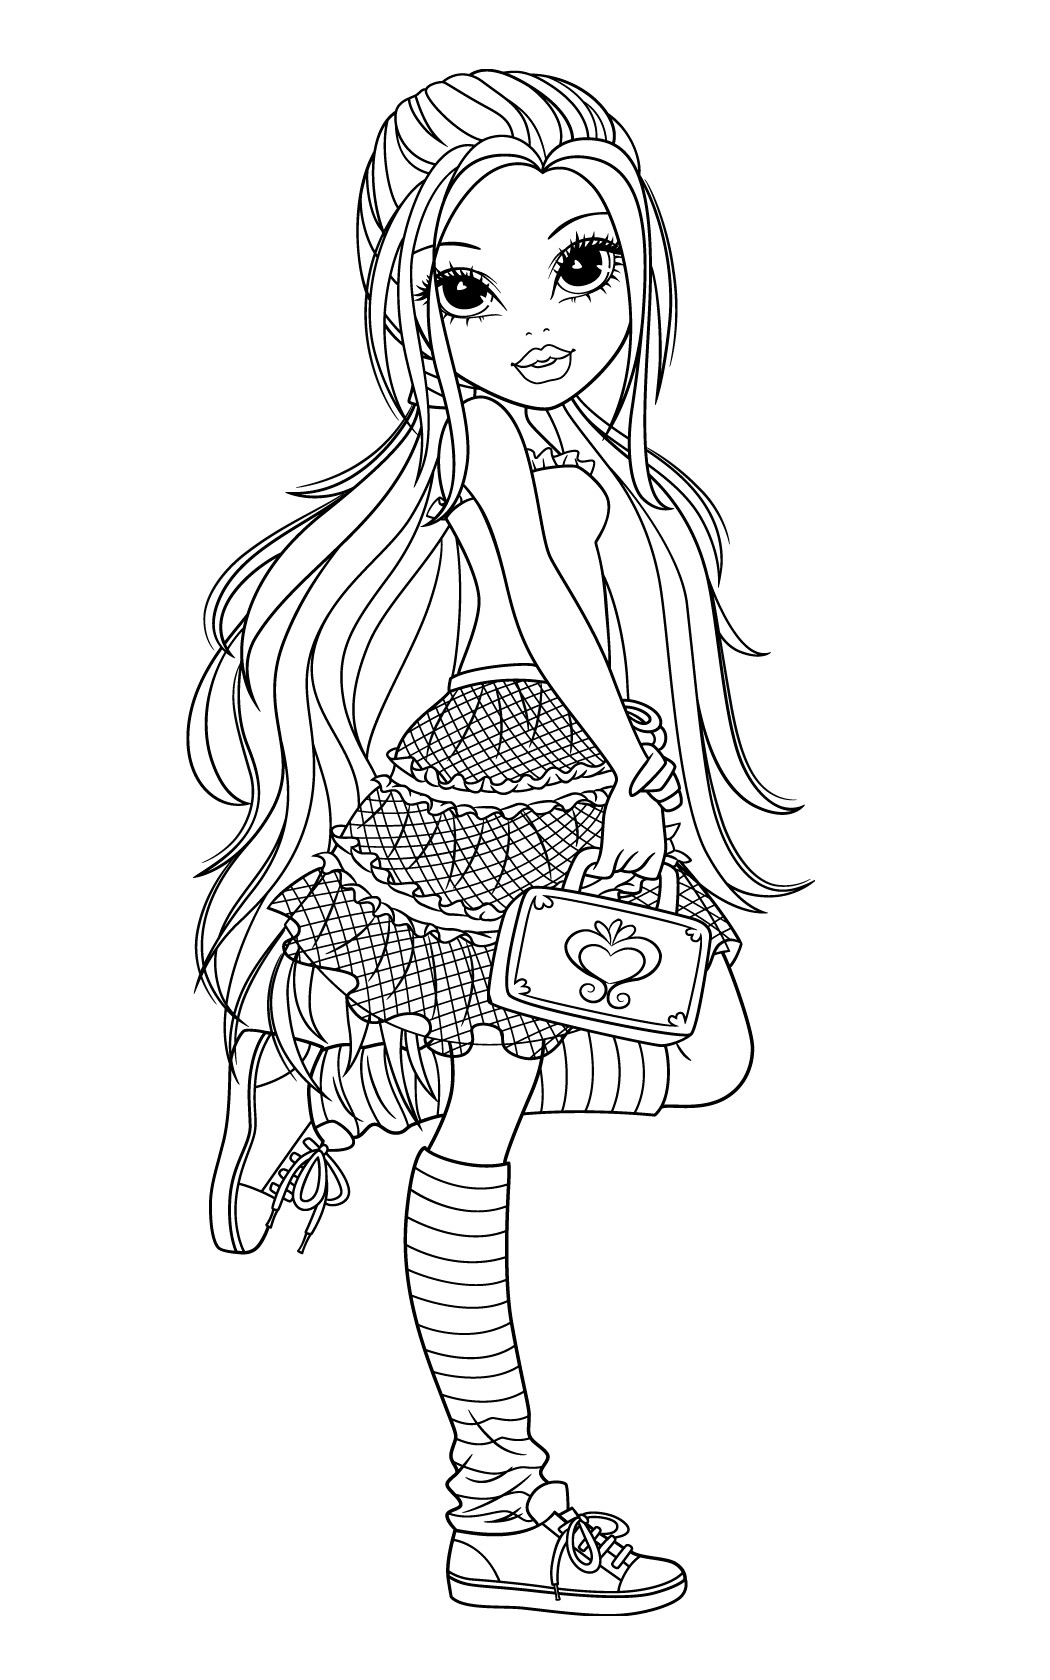 Coloring Pages For Girls Printable
 New Moxie Girlz Coloring Pages will be added frequently so